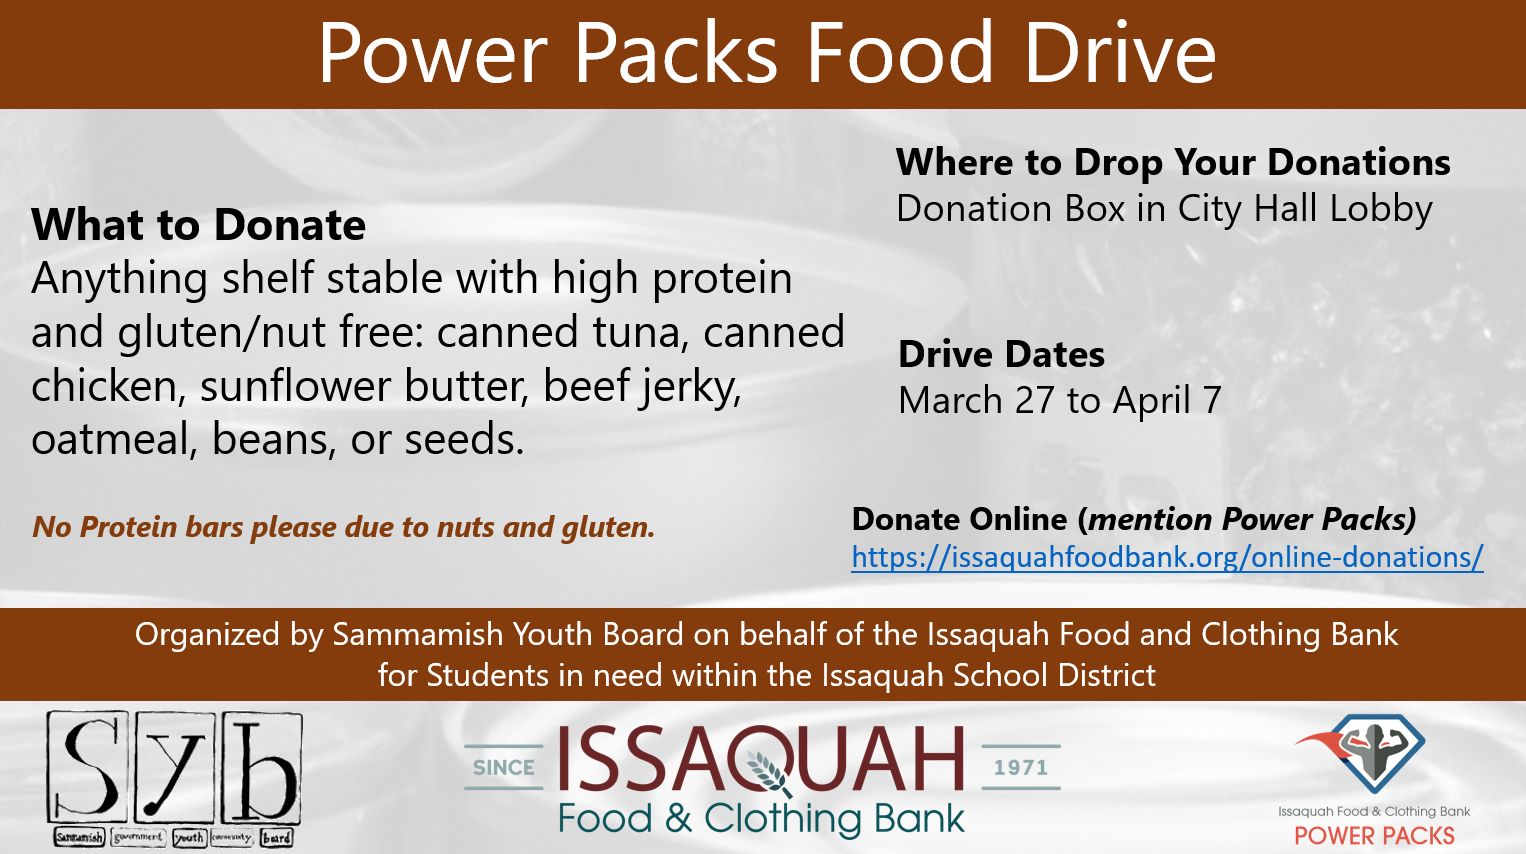 Power Packs Food Drive. What to donate: anything shelf stable with high protein and gluten/nut free: canned tuna, canned chicken, sunflower butter, beef jerky, oatmeal, beans, or seeds. No protein bars, please, due to nuts and gluten. Where to drop off your donations: Donation box in City Hall Lobby. Drive dates: March 27 - April 7. Donate online (mention Power Packs) https://issaquahfoodbank.org/online-donations/  Organized by Sammamish Youth Board on behalf of the Issaquah Food and Clothing Bank